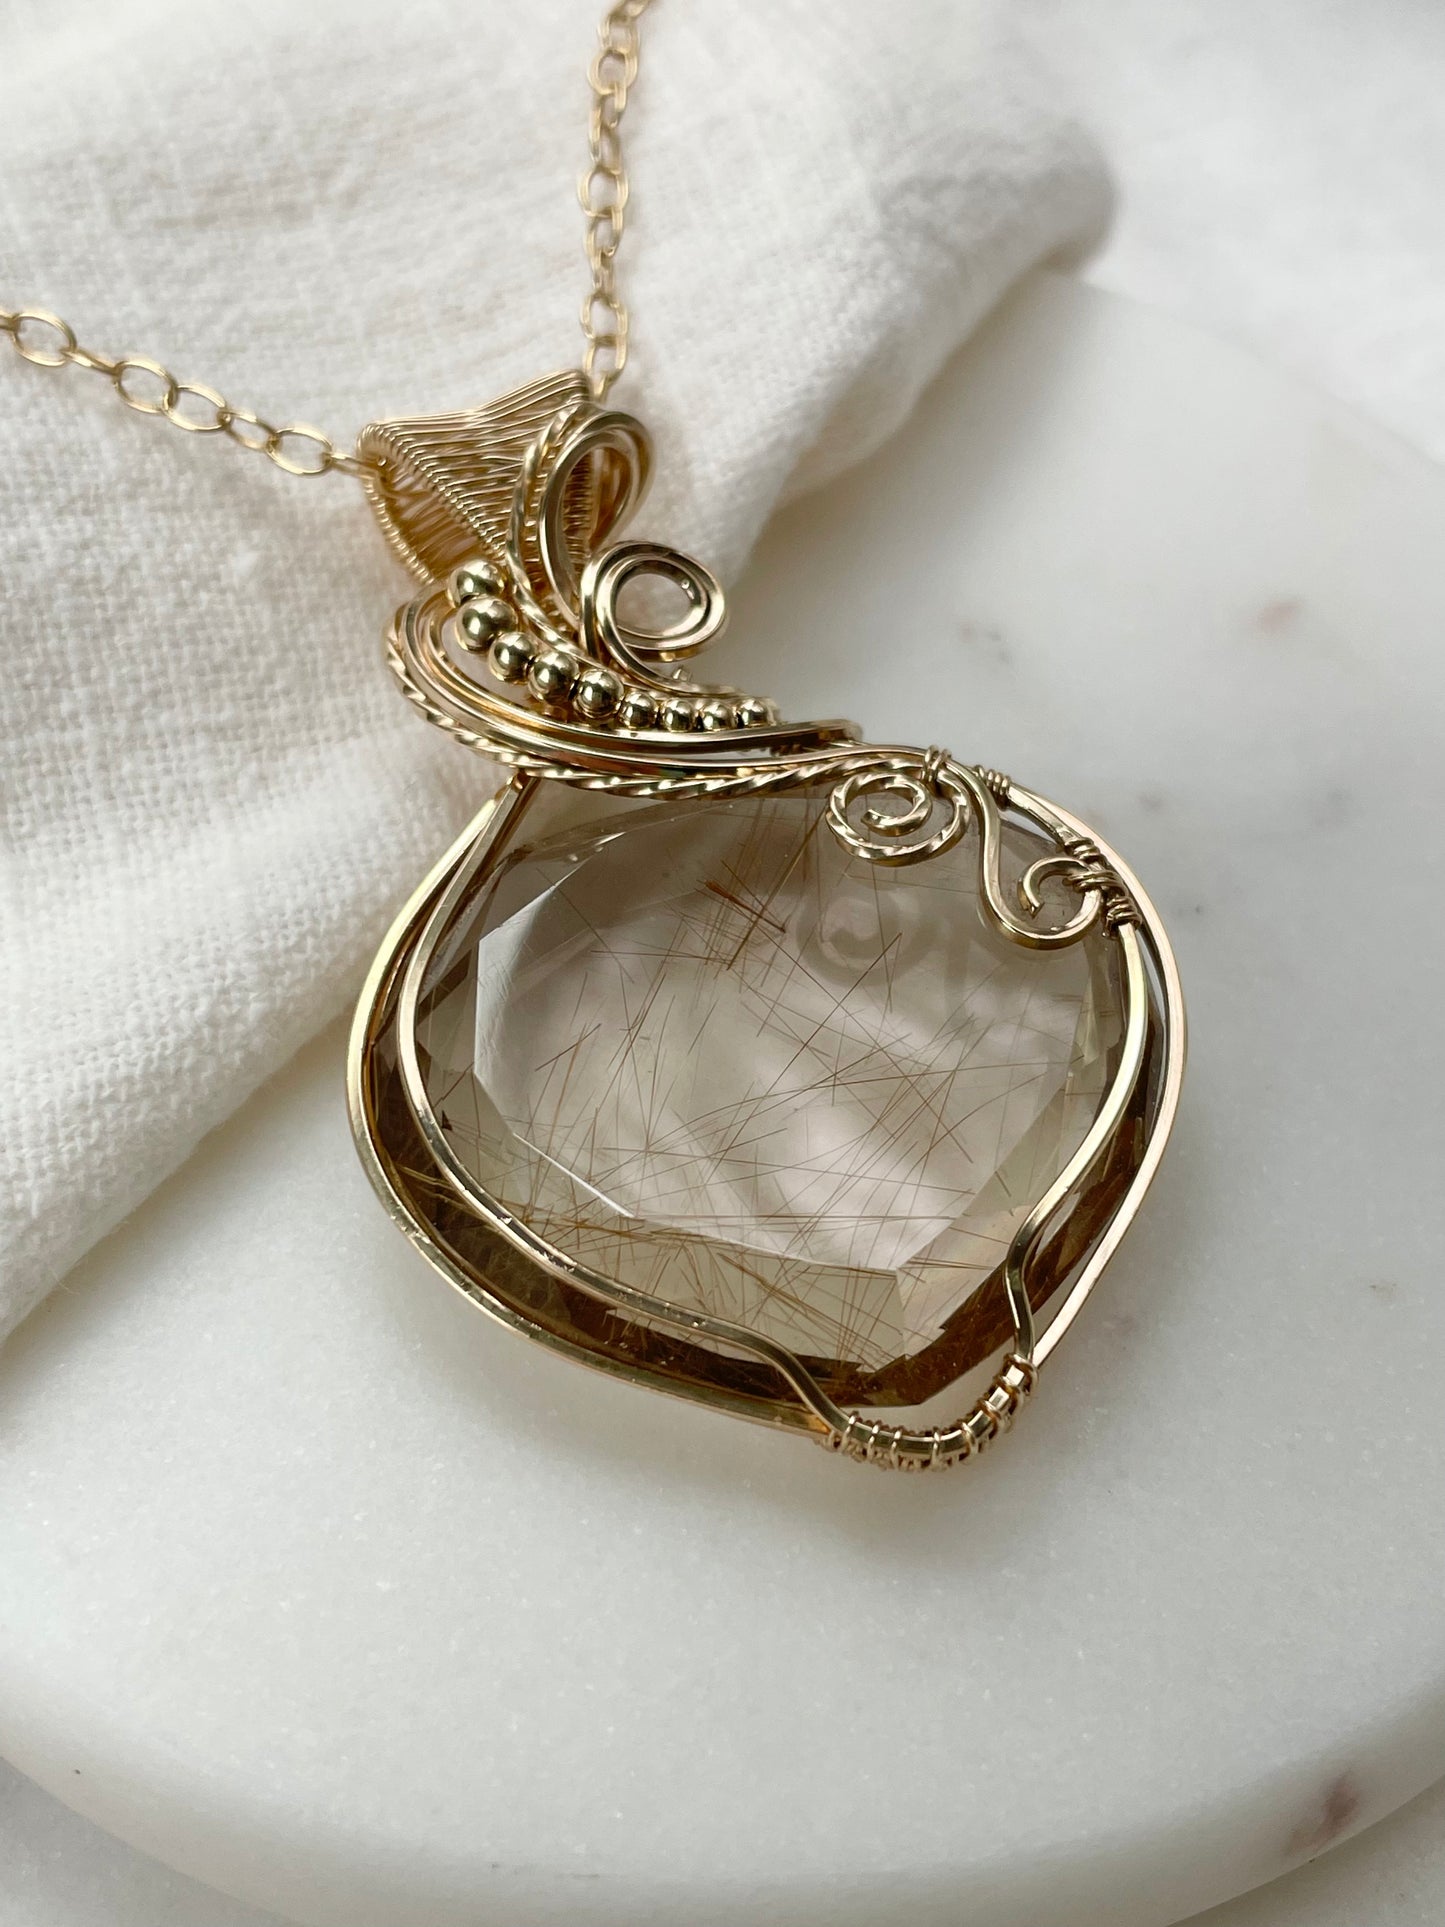 High Quality, Faceted Rutilated Smoky Quartz Necklace in 14k Gold Filled